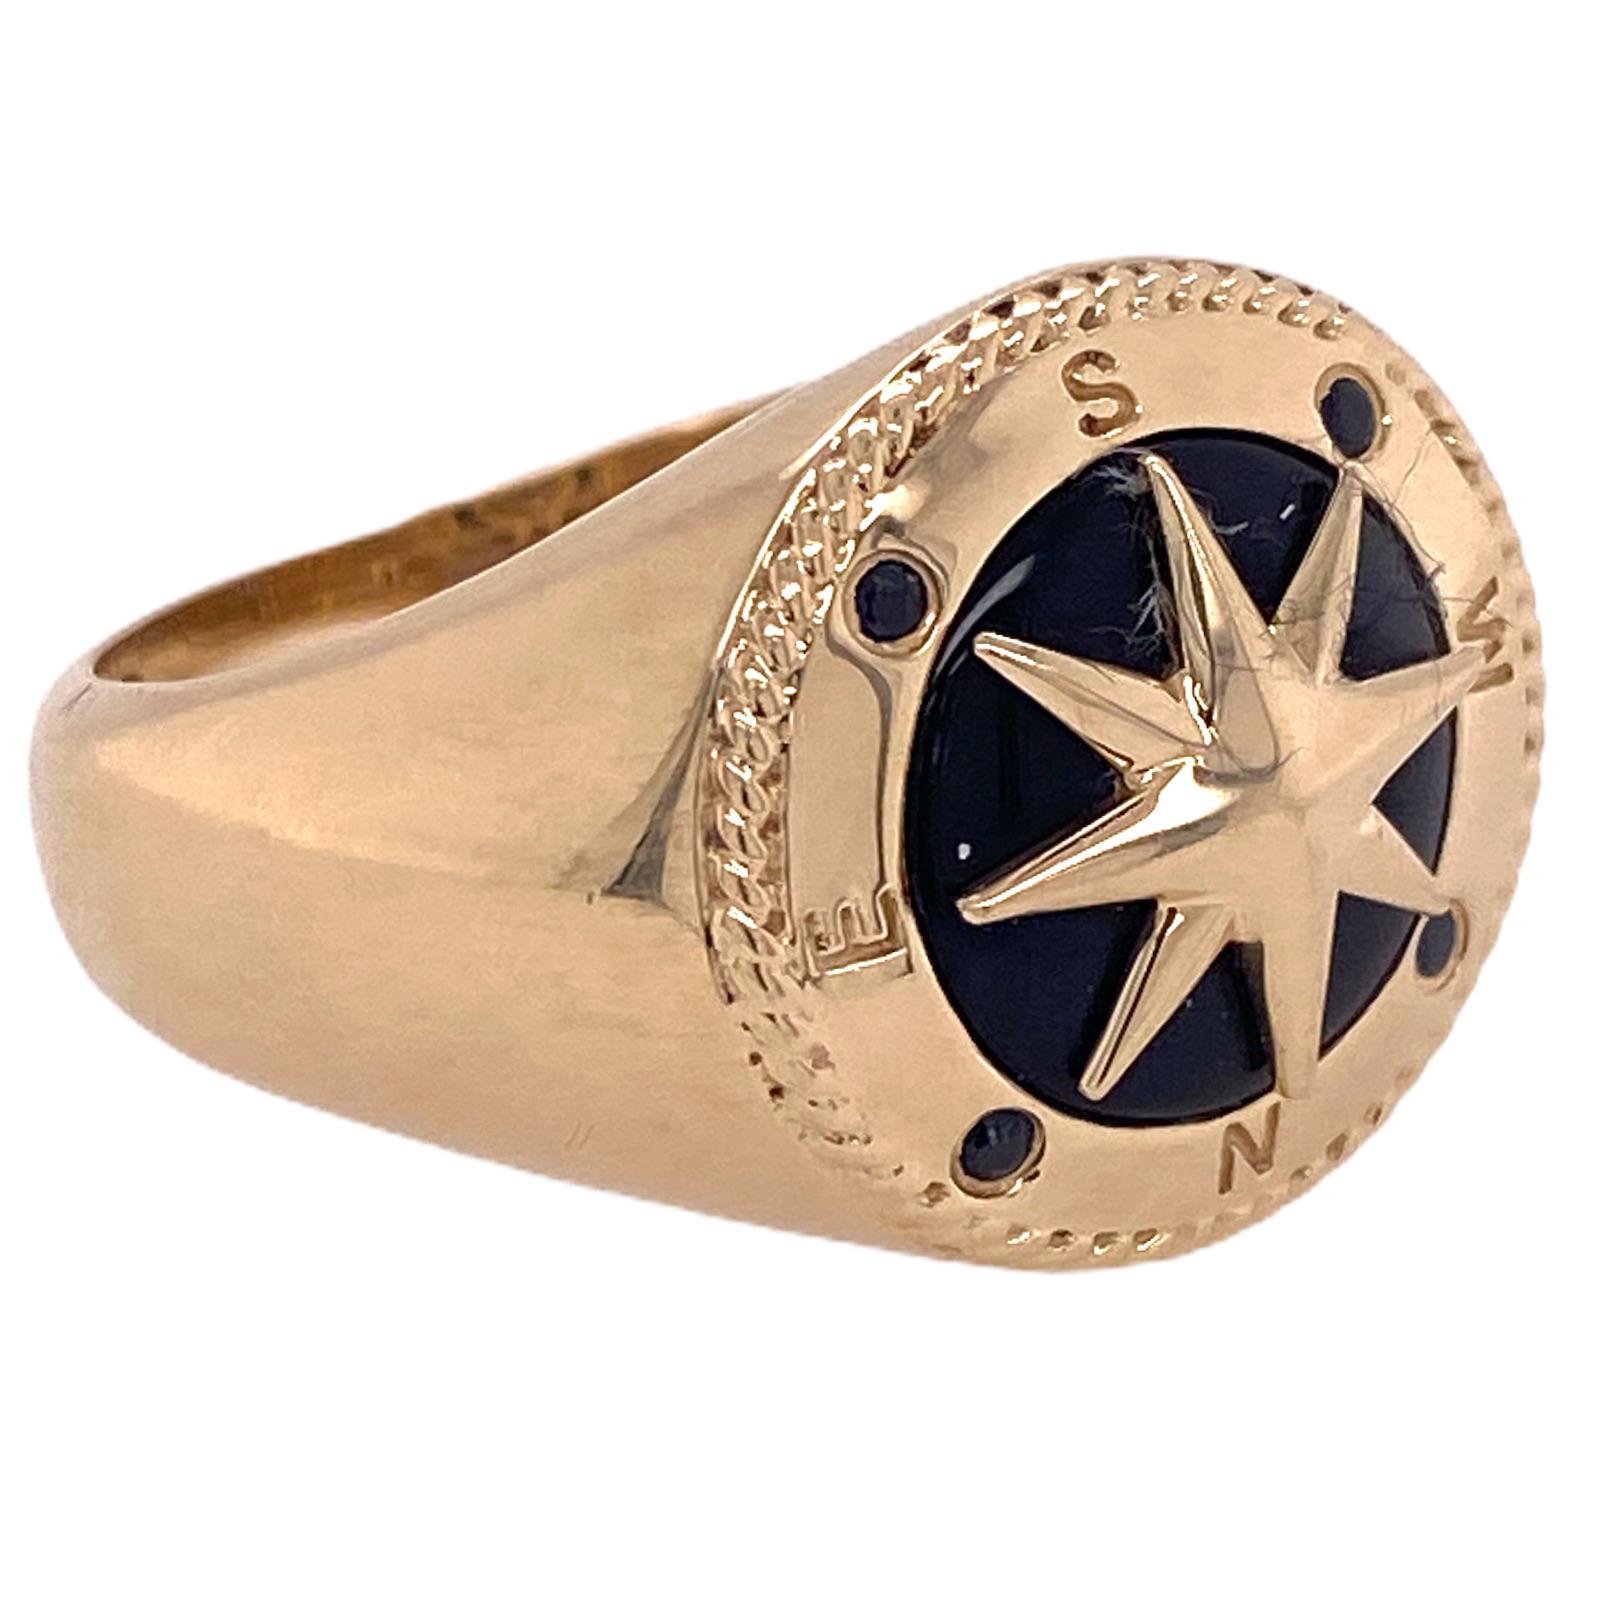 Effy black onyx compass ring fashioned in 14 karat yellow gold. The round compass top measures 17mm in diameter, and the ring is currently size 10.5 (can be sized). This is a piece from their current collection.